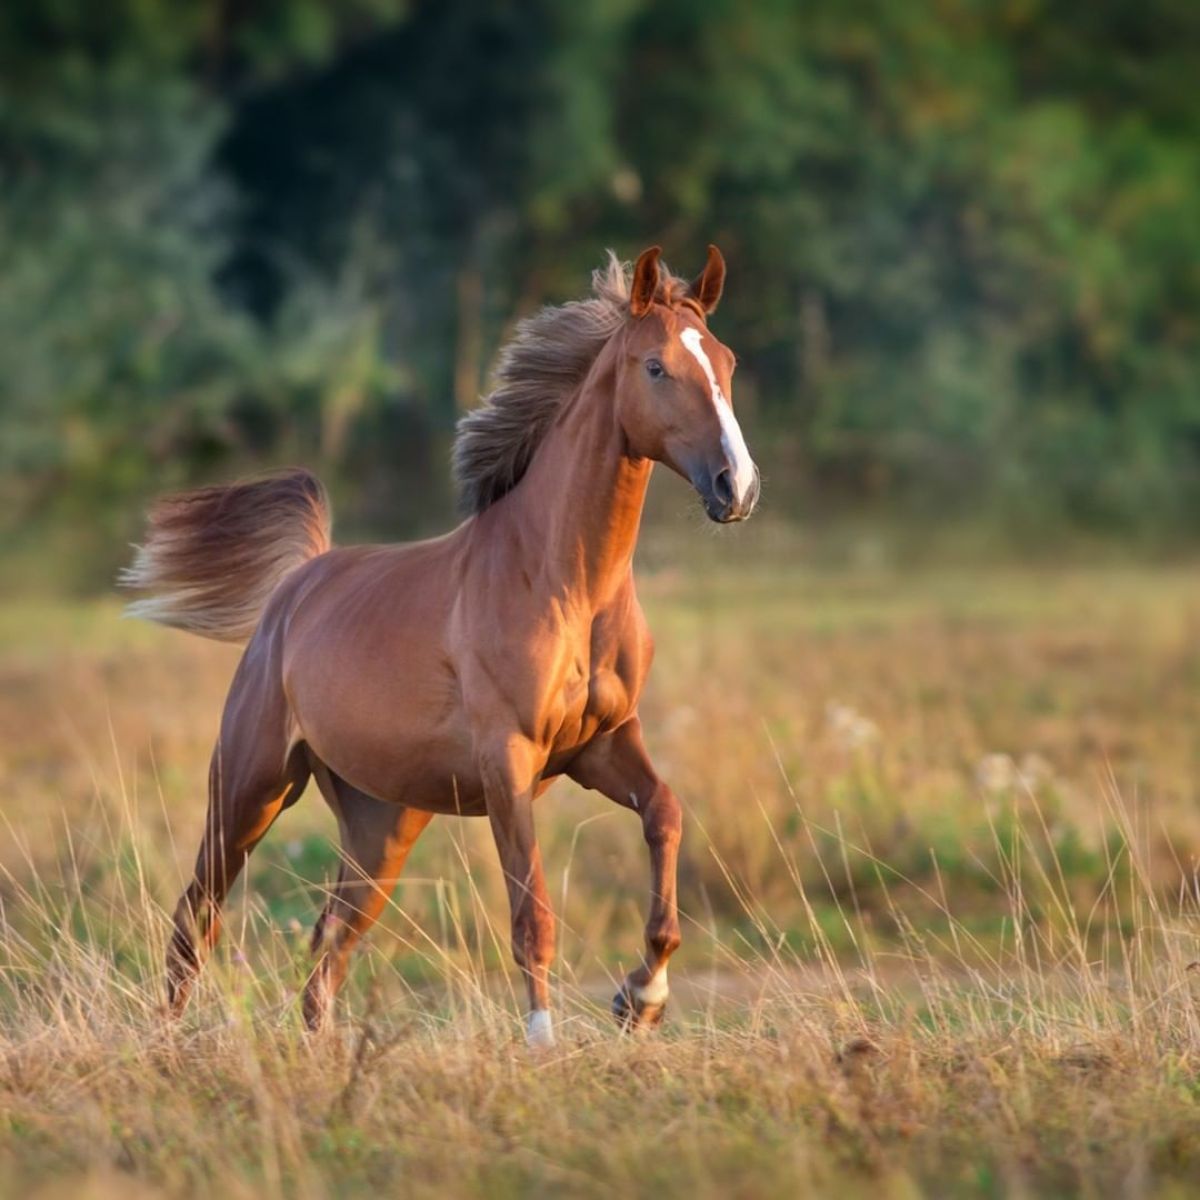 An angry-looking brown horse runs on a field.